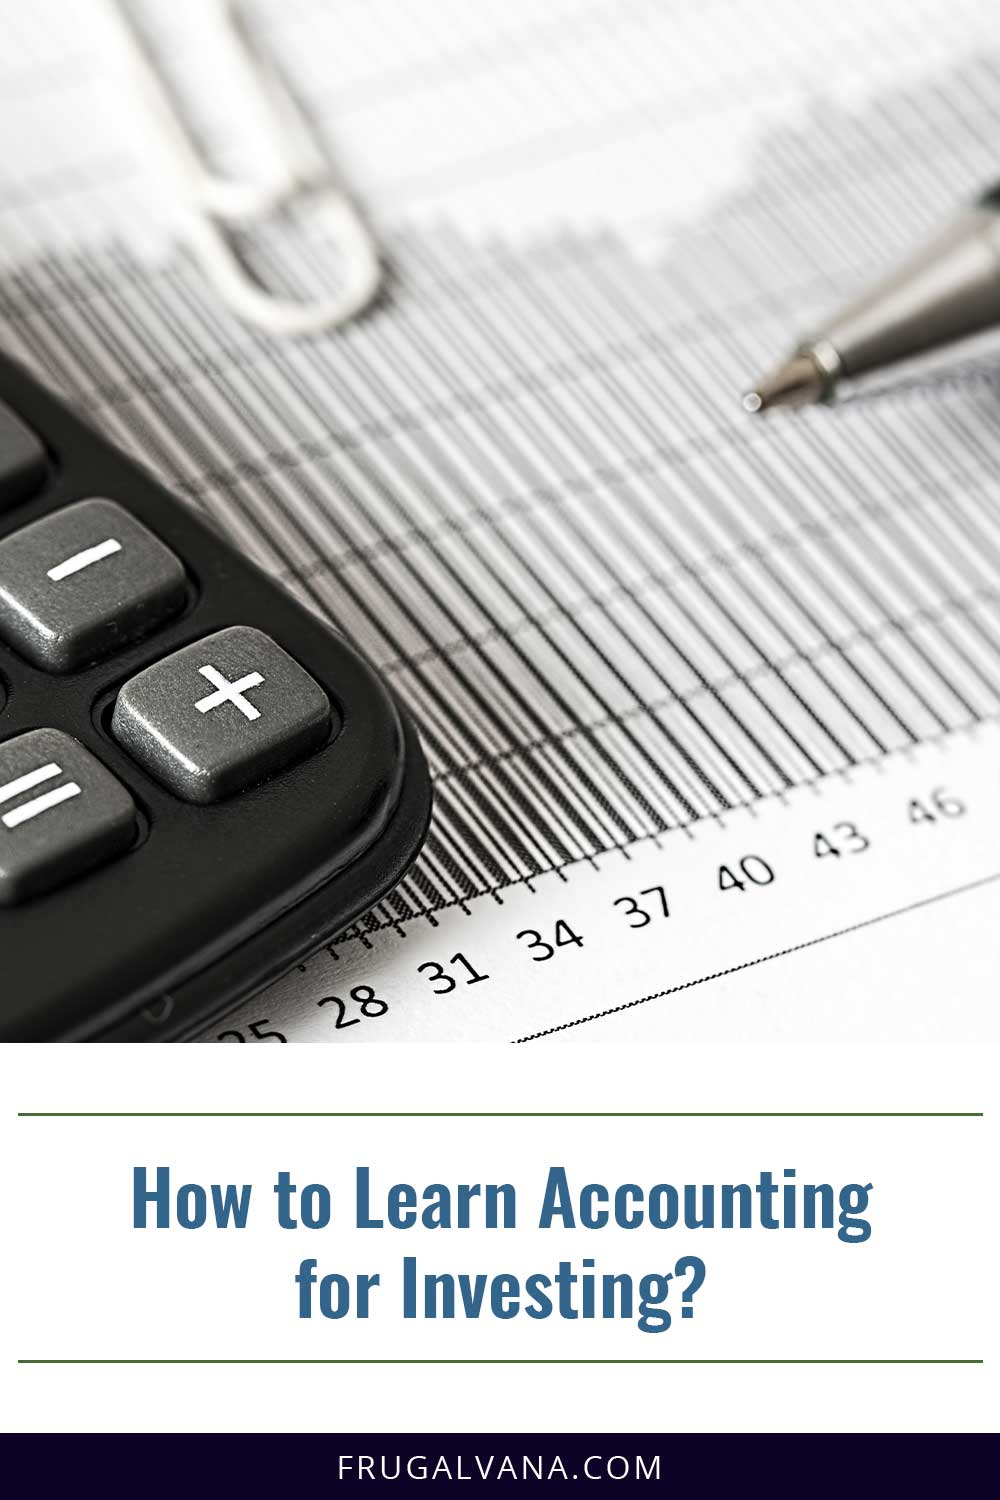 How to Learn Accounting for Investing?